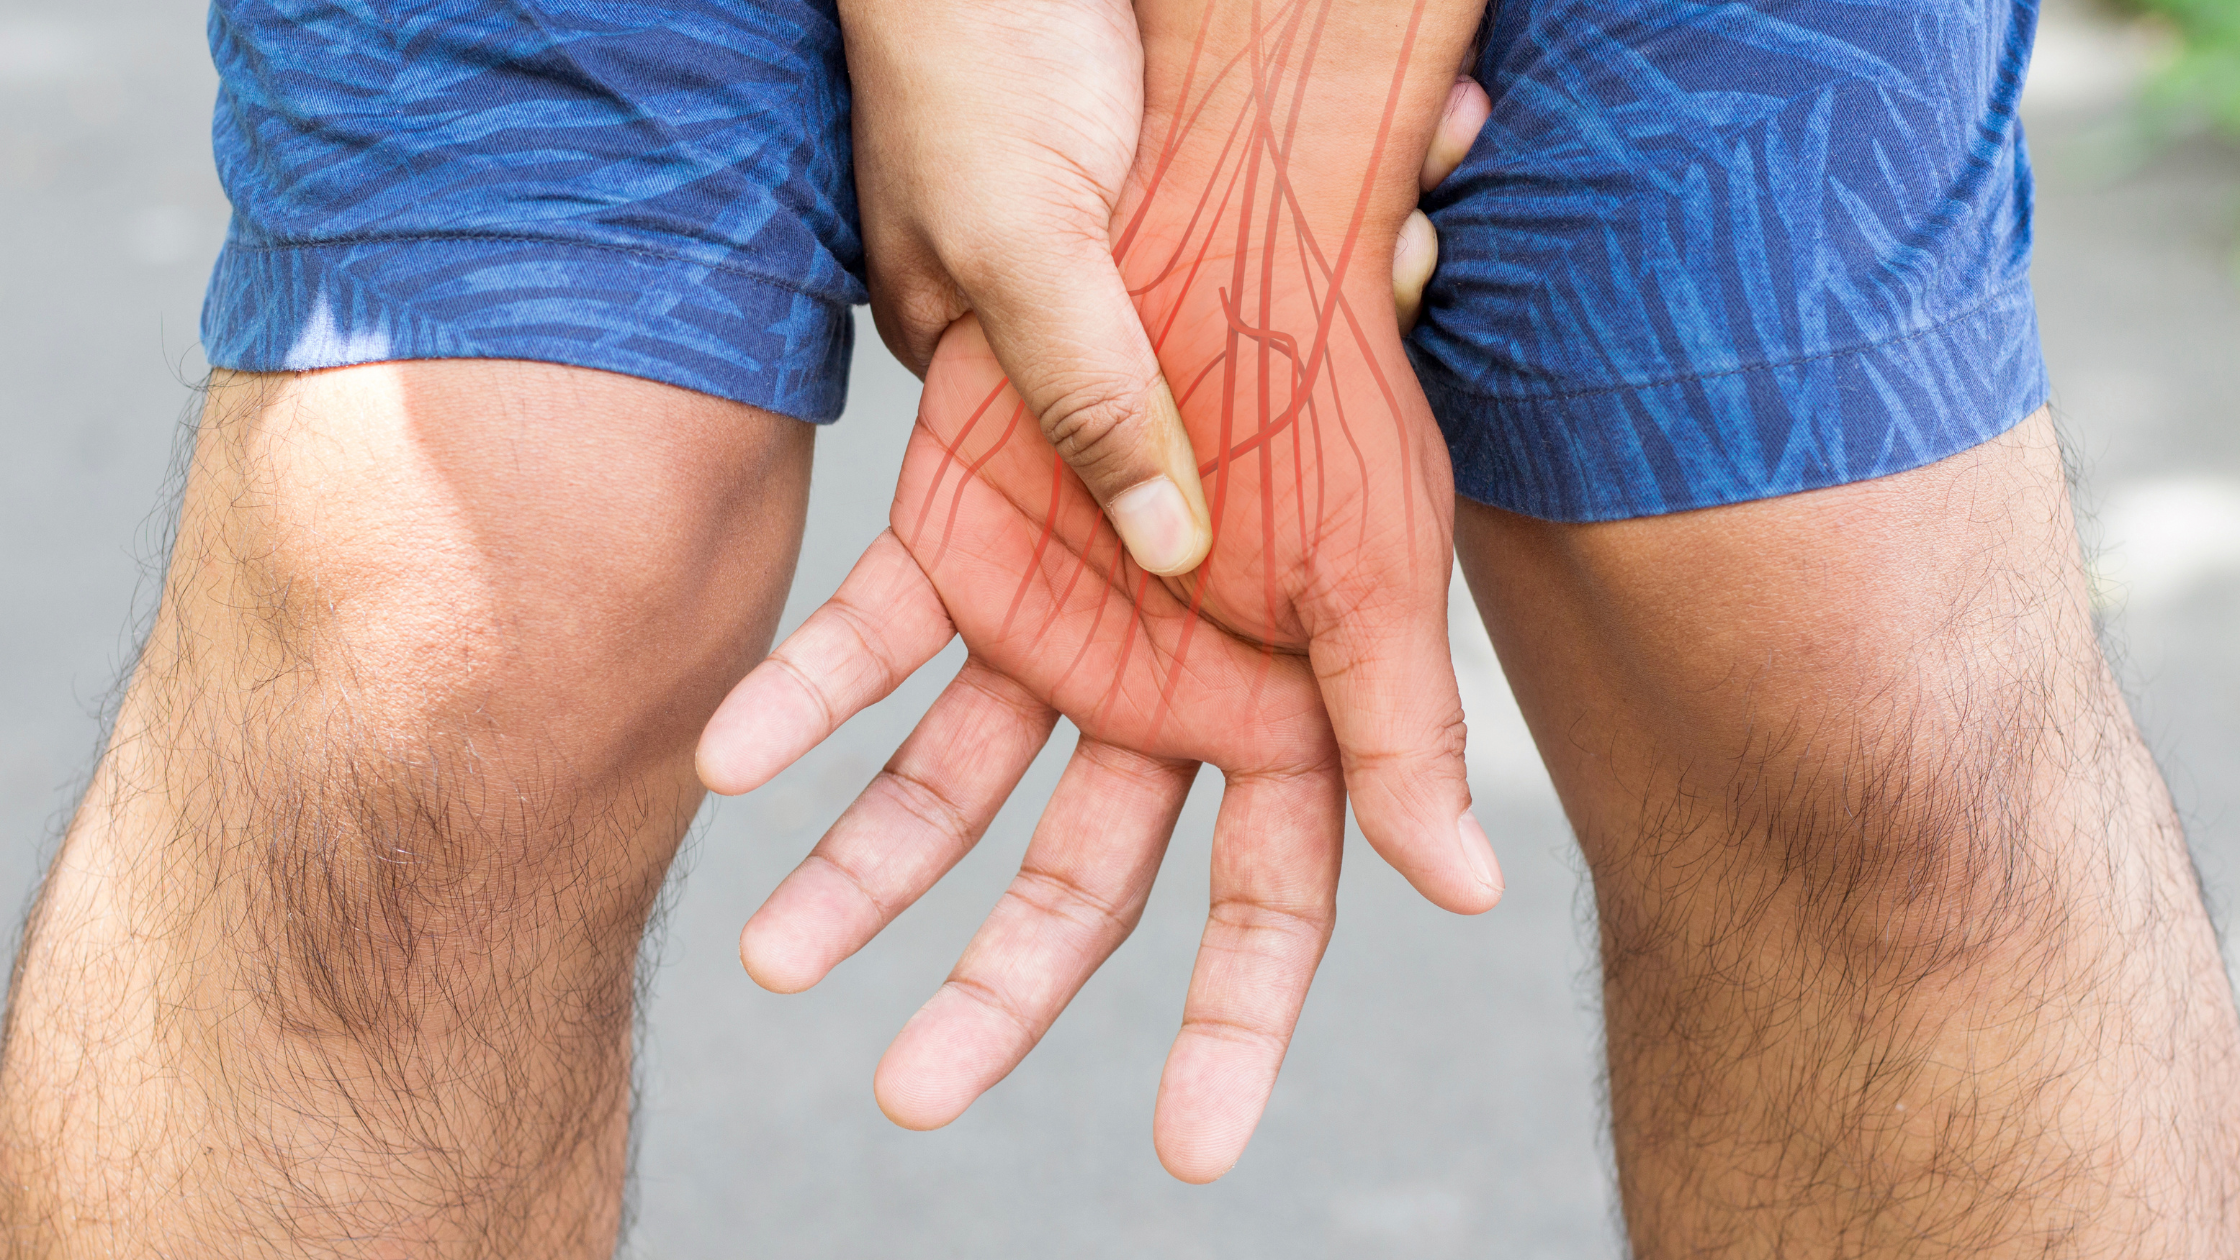 Do you have chronic nerve pain? CBD might be the answer!